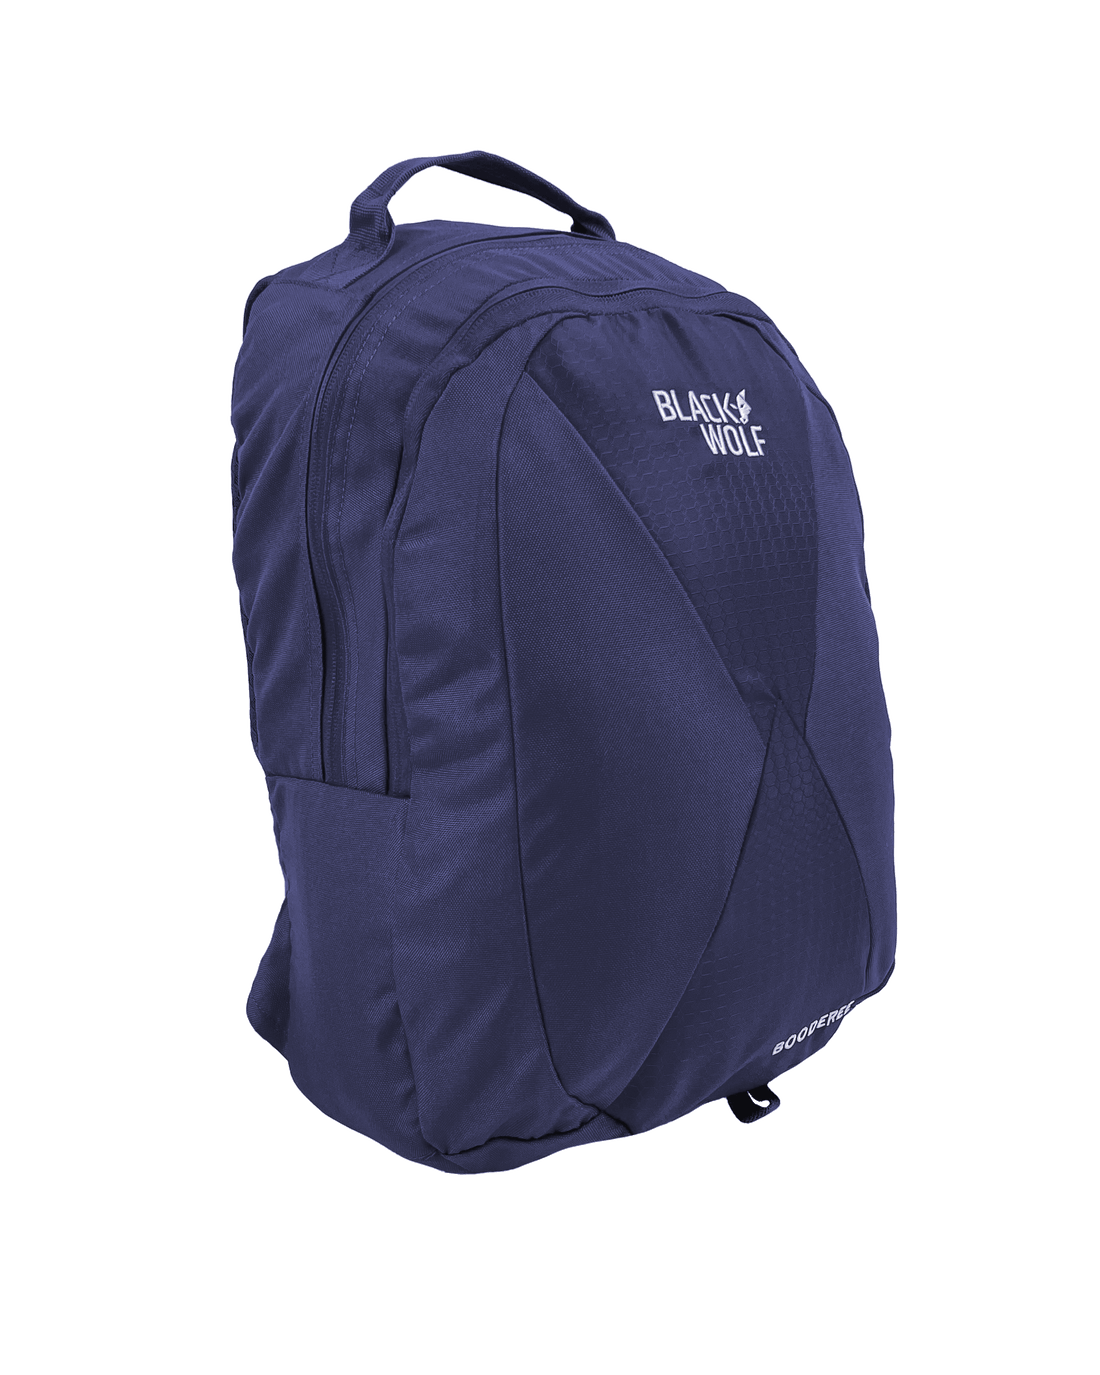 Black Wolf - Booderee 20L Backpack - Eclipse-1